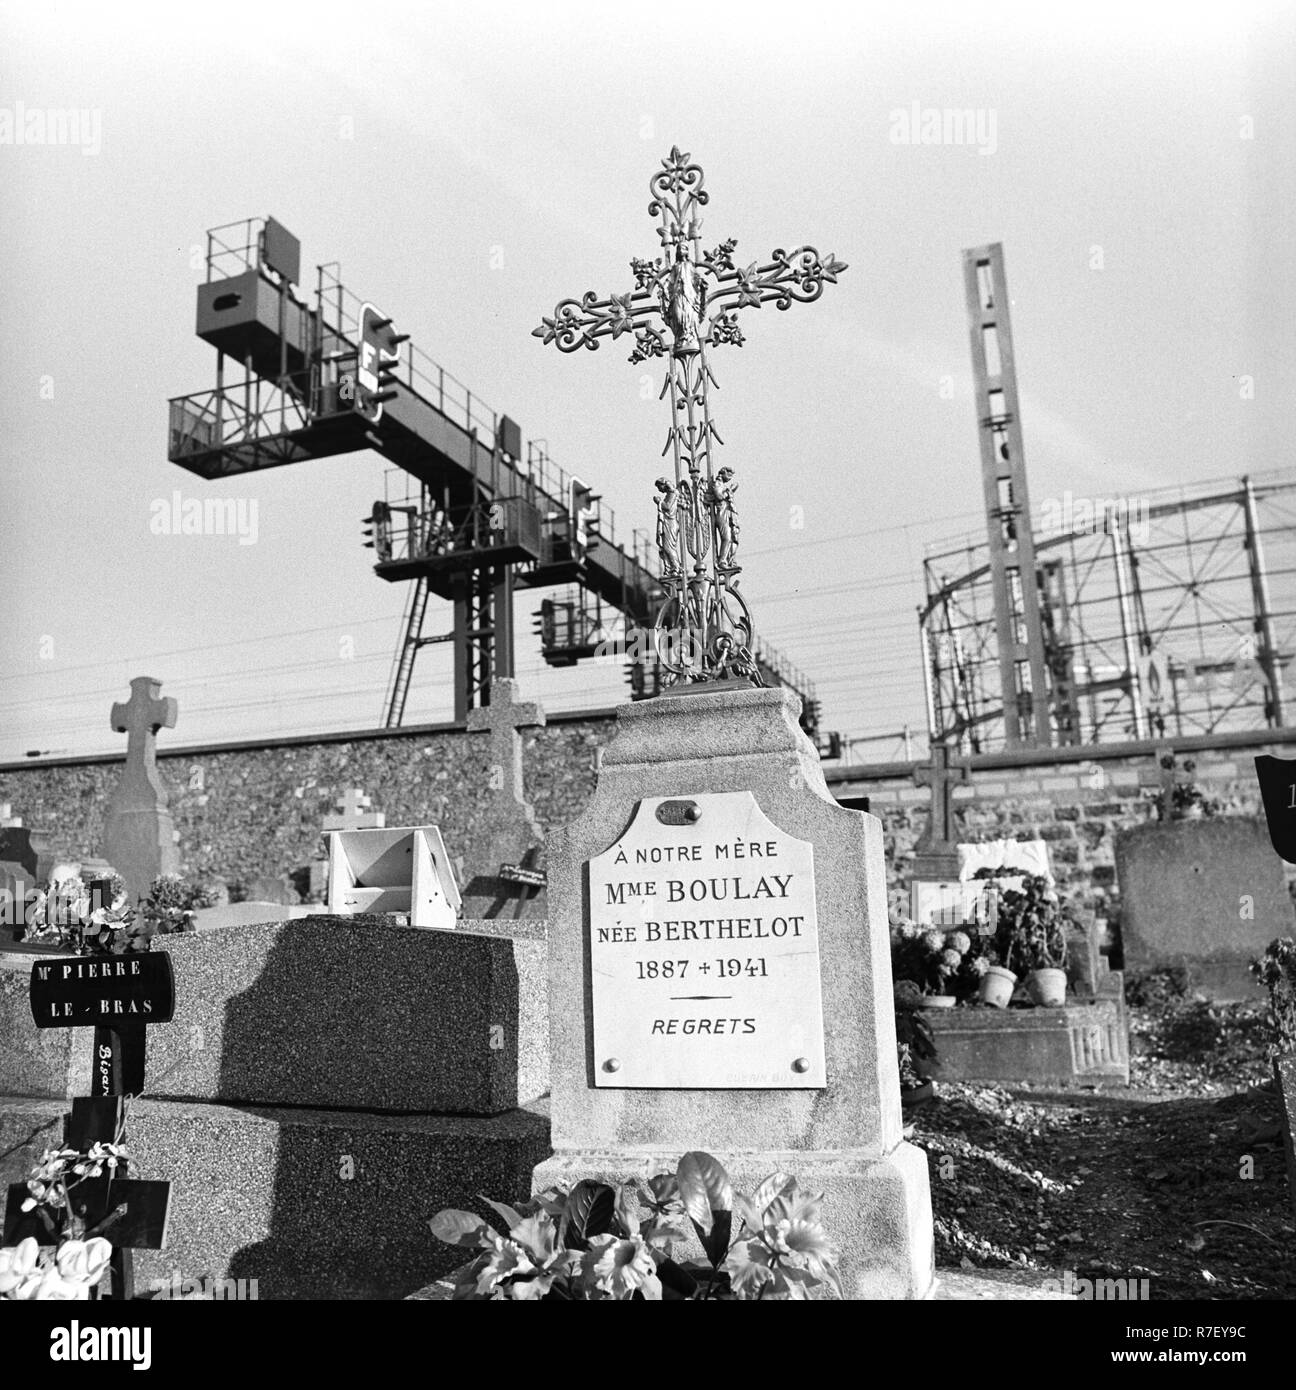 View of a grave on Pere Lachaise, the biggest cemetery in Paris, France, in November 1970. The gravestone commemorates 'Our mother Madame Boulay'. In the background, industrial plants are pictured. On the Pere Lachaise cemetery, many famous historical figures are buried. Photo: Wilfried Glienke | usage worldwide Stock Photo